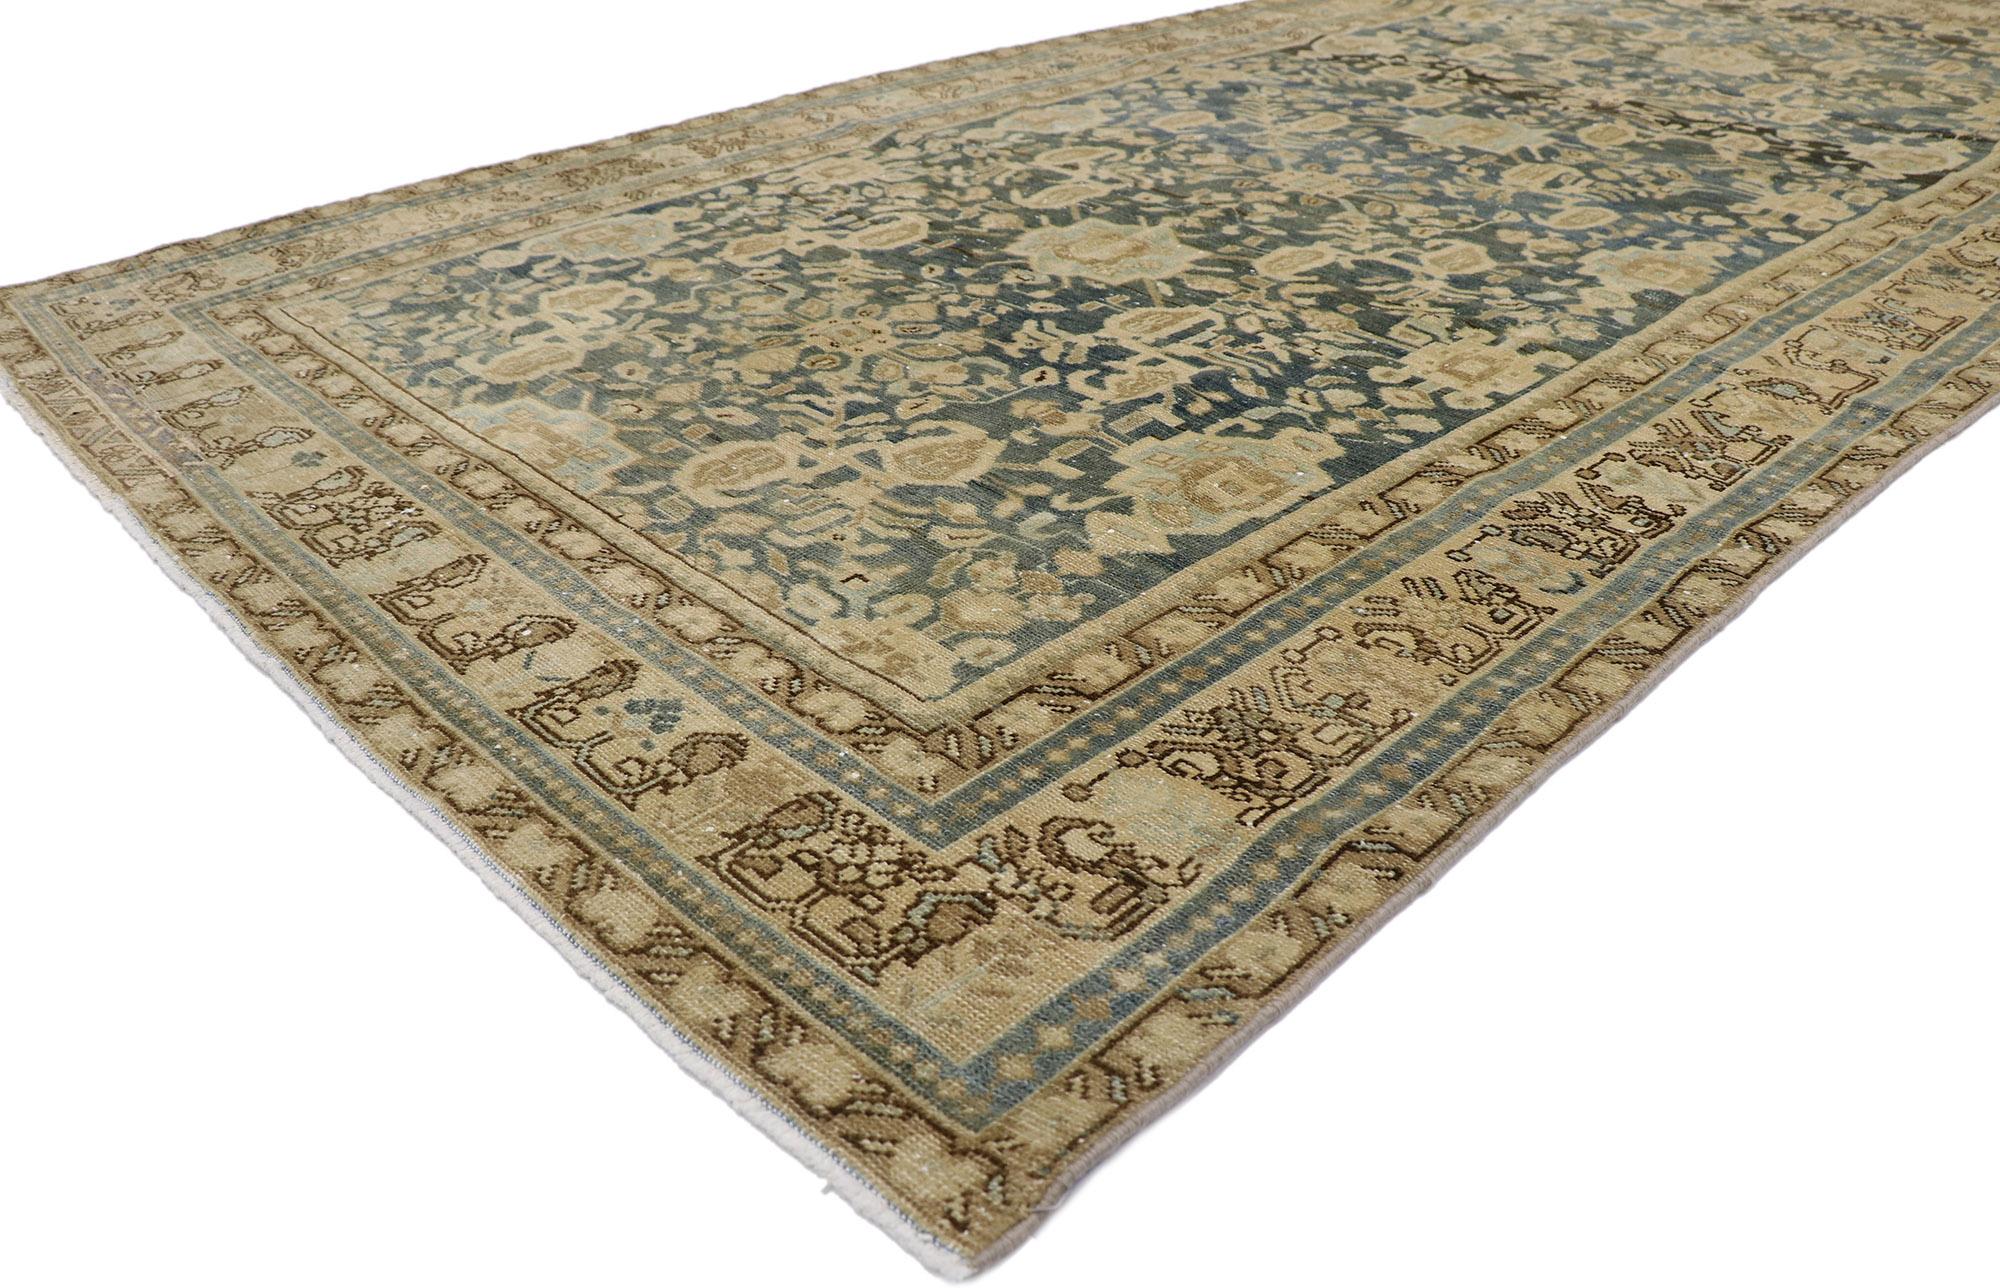 60932 Distressed antique Persian Malayer Gallery rug with Modern Rustic Style 05'04 x 10'07. Cleverly composed and poised to impress with its rustic sensibility, this hand knotted wool distressed antique Persian Malayer gallery rug will take on a